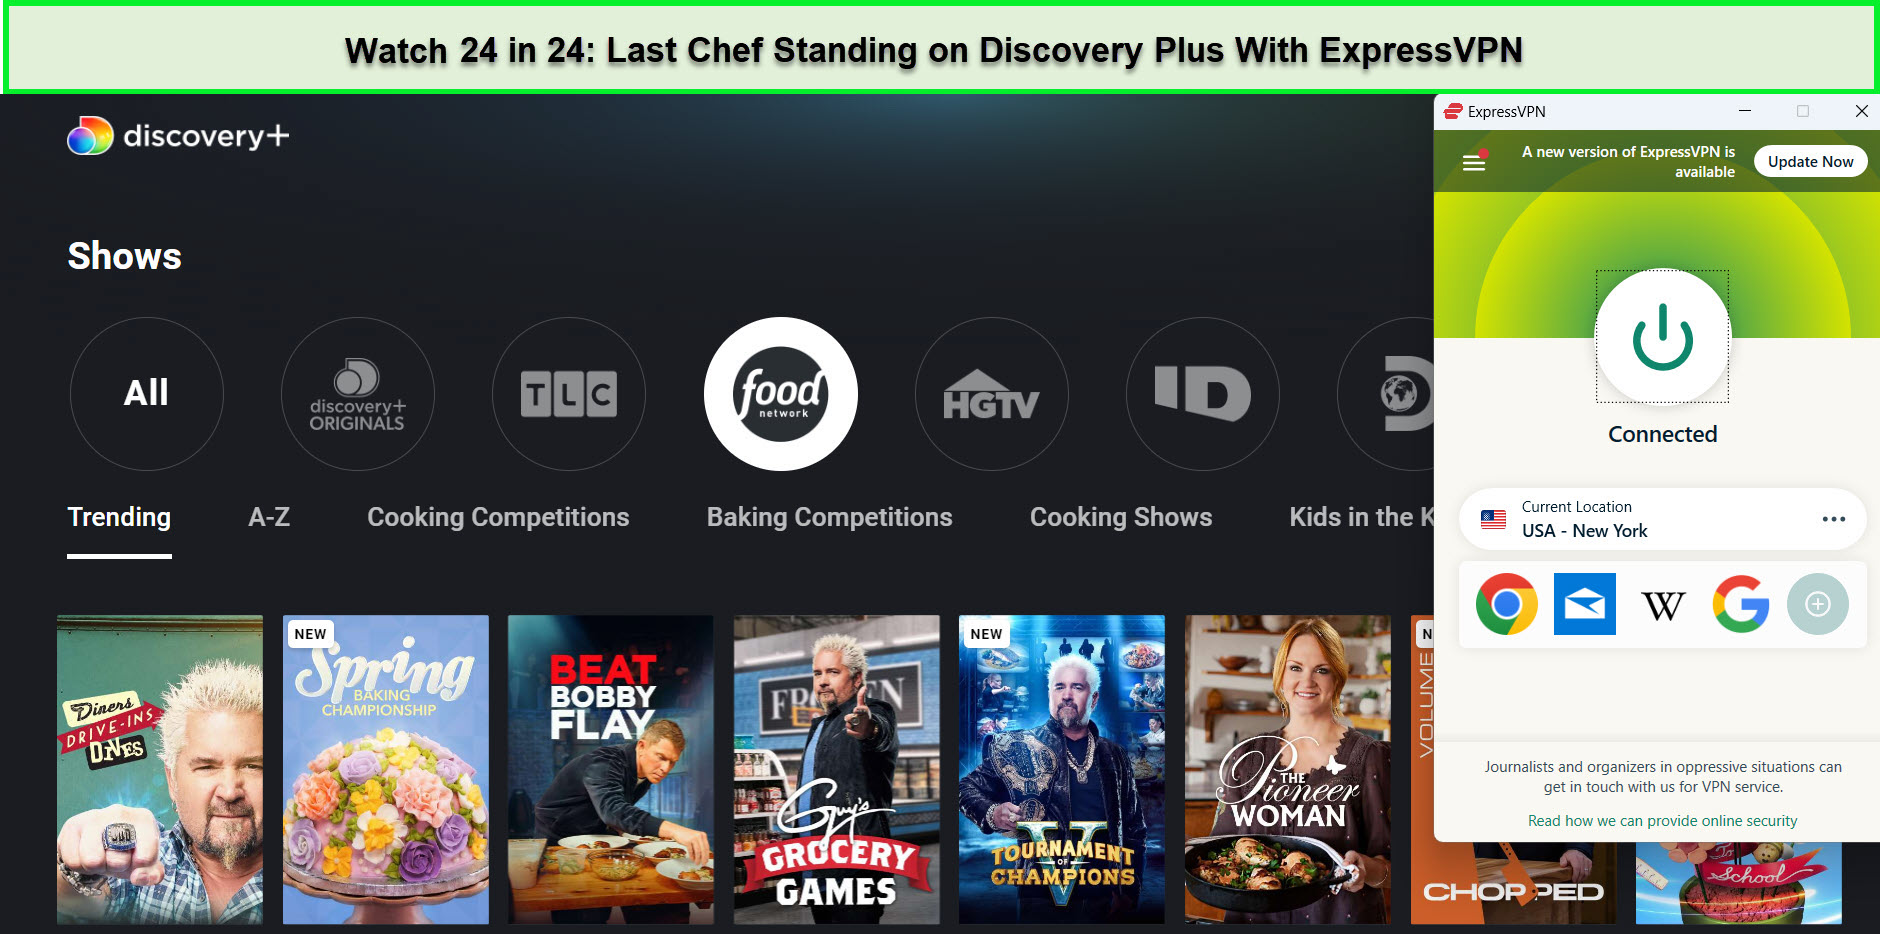 Watch-24-in-24-Last-Chef-Standing-in-UK-on-Discovery-Plus-with-ExpressVPN